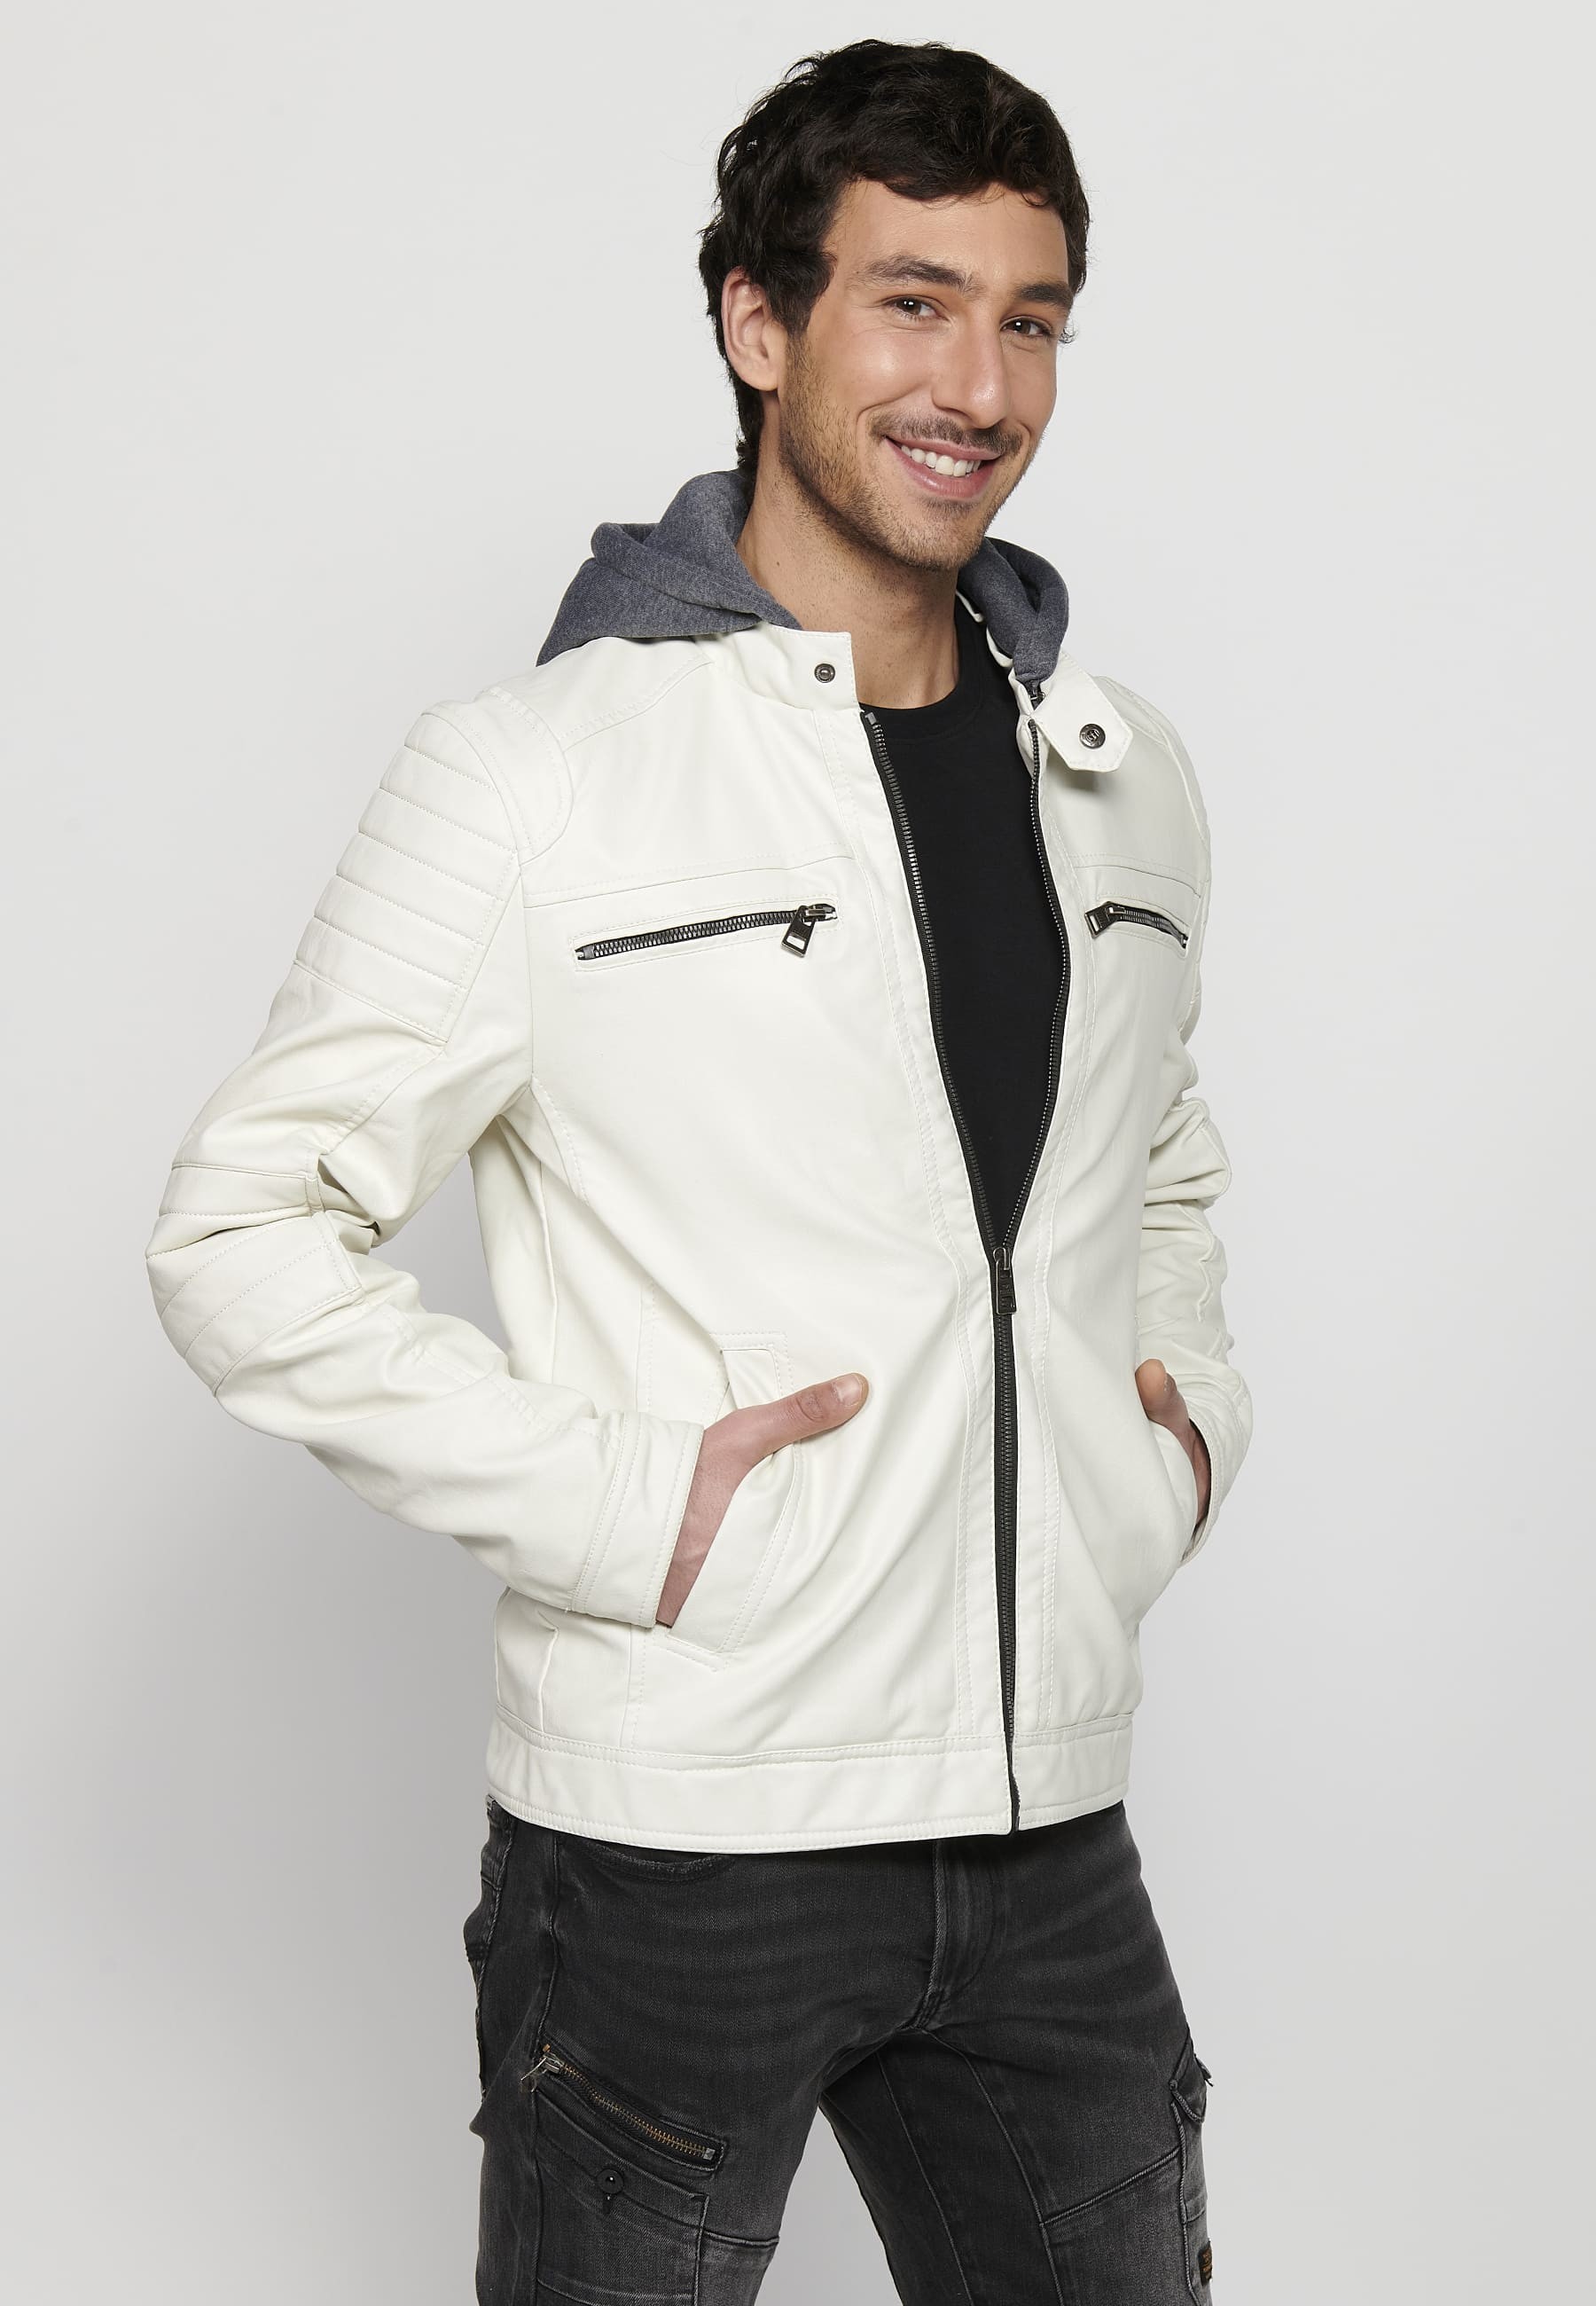 Long-sleeved jacket with zipper front closure and adjustable detachable hooded collar with drawstring in Ecru for Men 4